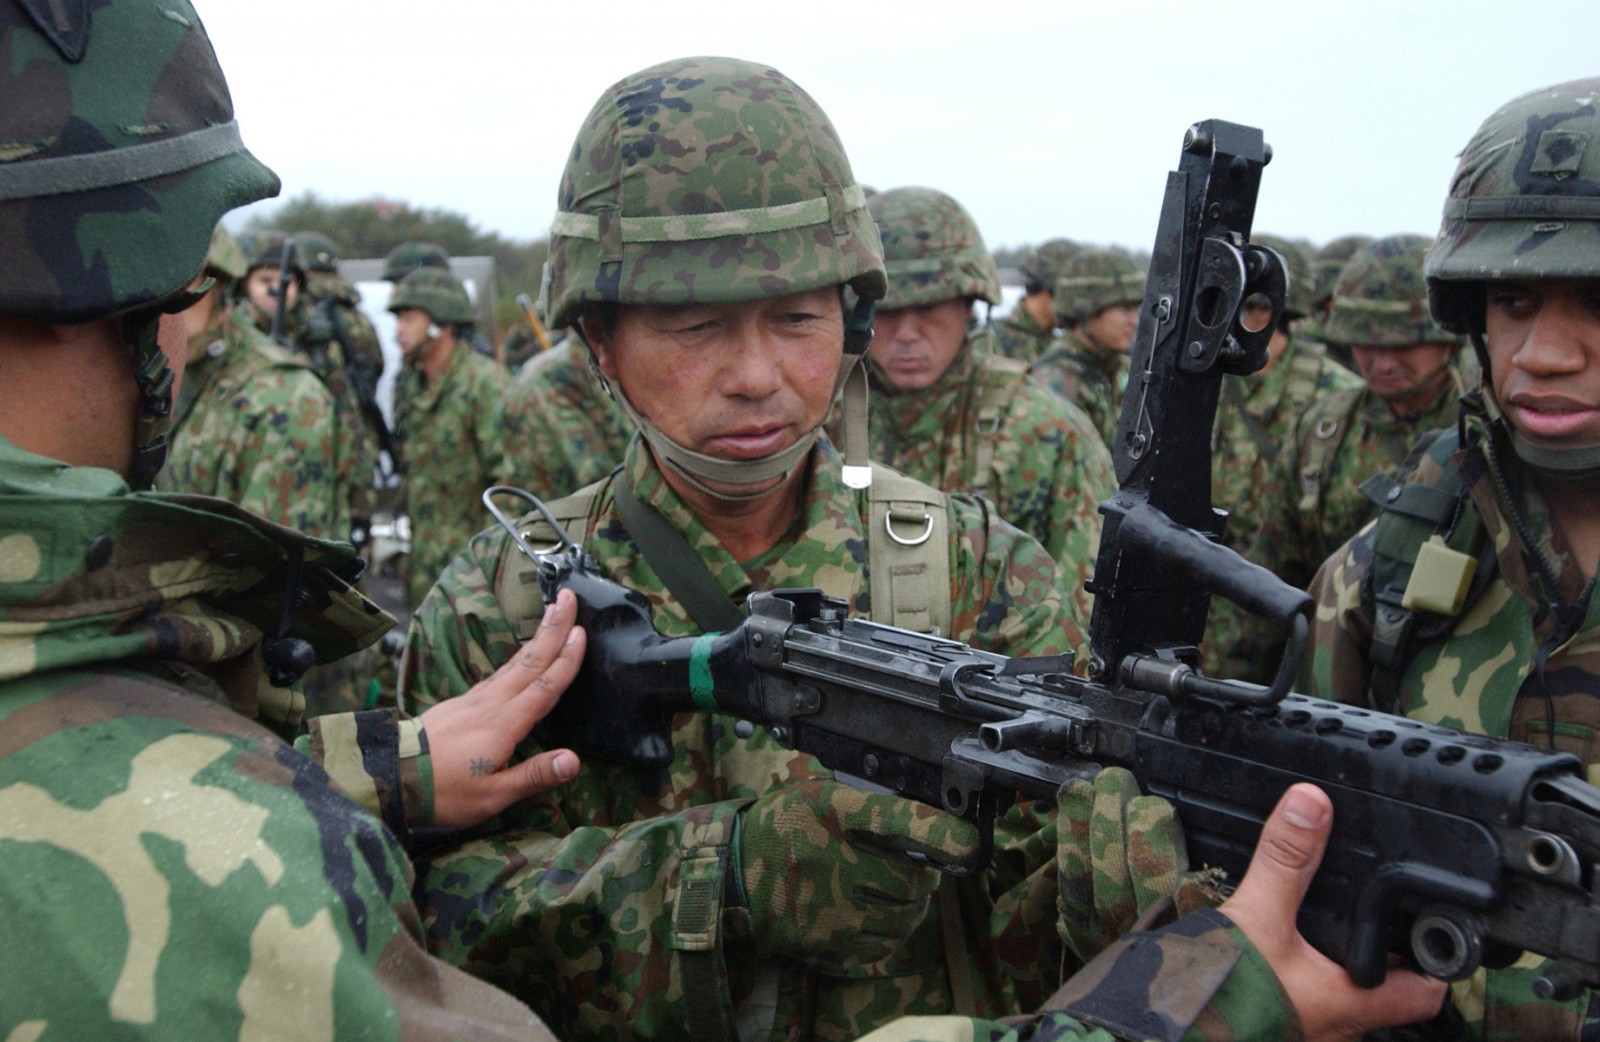 American Soldiers demonstrate the M249 Squad Automatic Weapon to a Japanese soldier of the 39th Infantry Regiment, Japan Ground Self-Defense Force, Nov. 2. during Exercise Orient Shield 2005.  (U.S. Army photo by Staff Sgt. Jonathan Crane, 304th MPAD.)